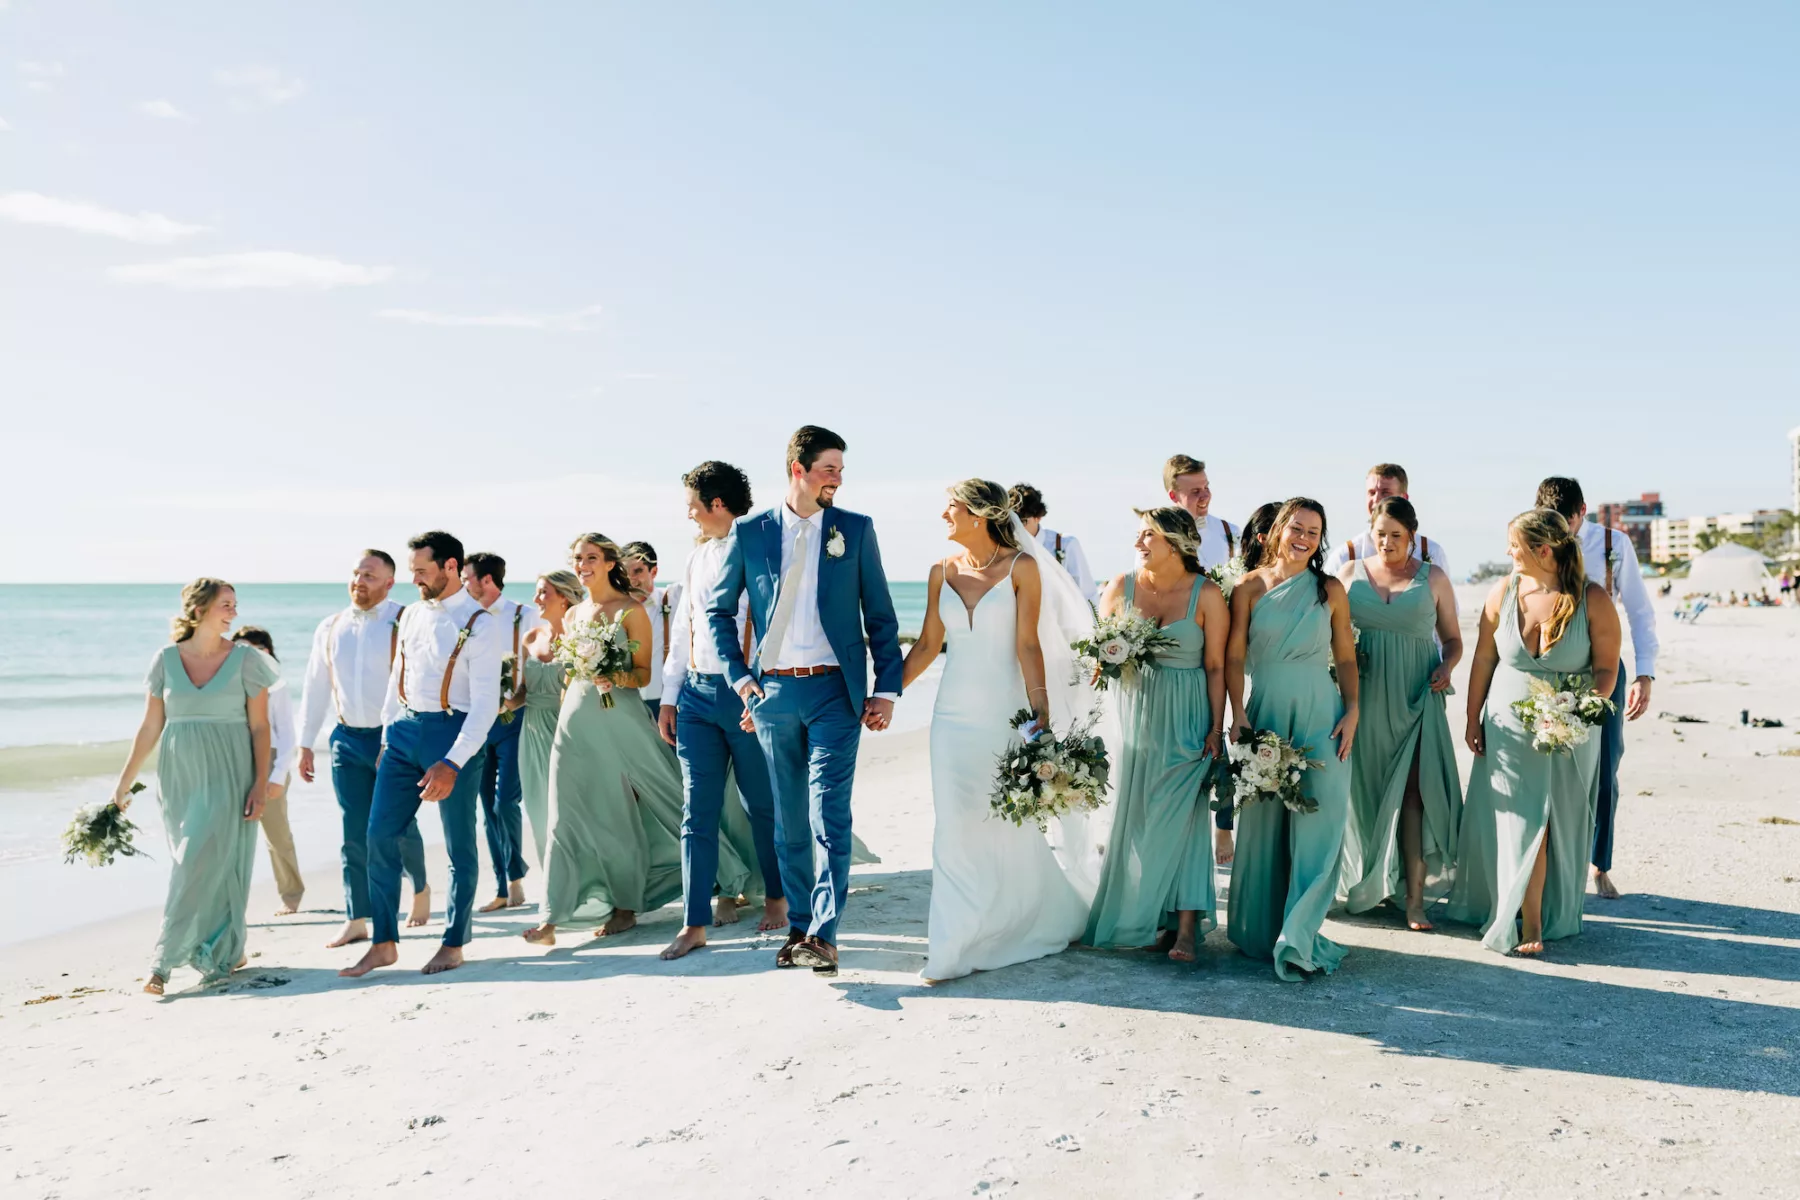 Sage and Blue Bridal Party Attire for Beach Wedding Inspiration | Mismatched Green Bridesmaid Dresses